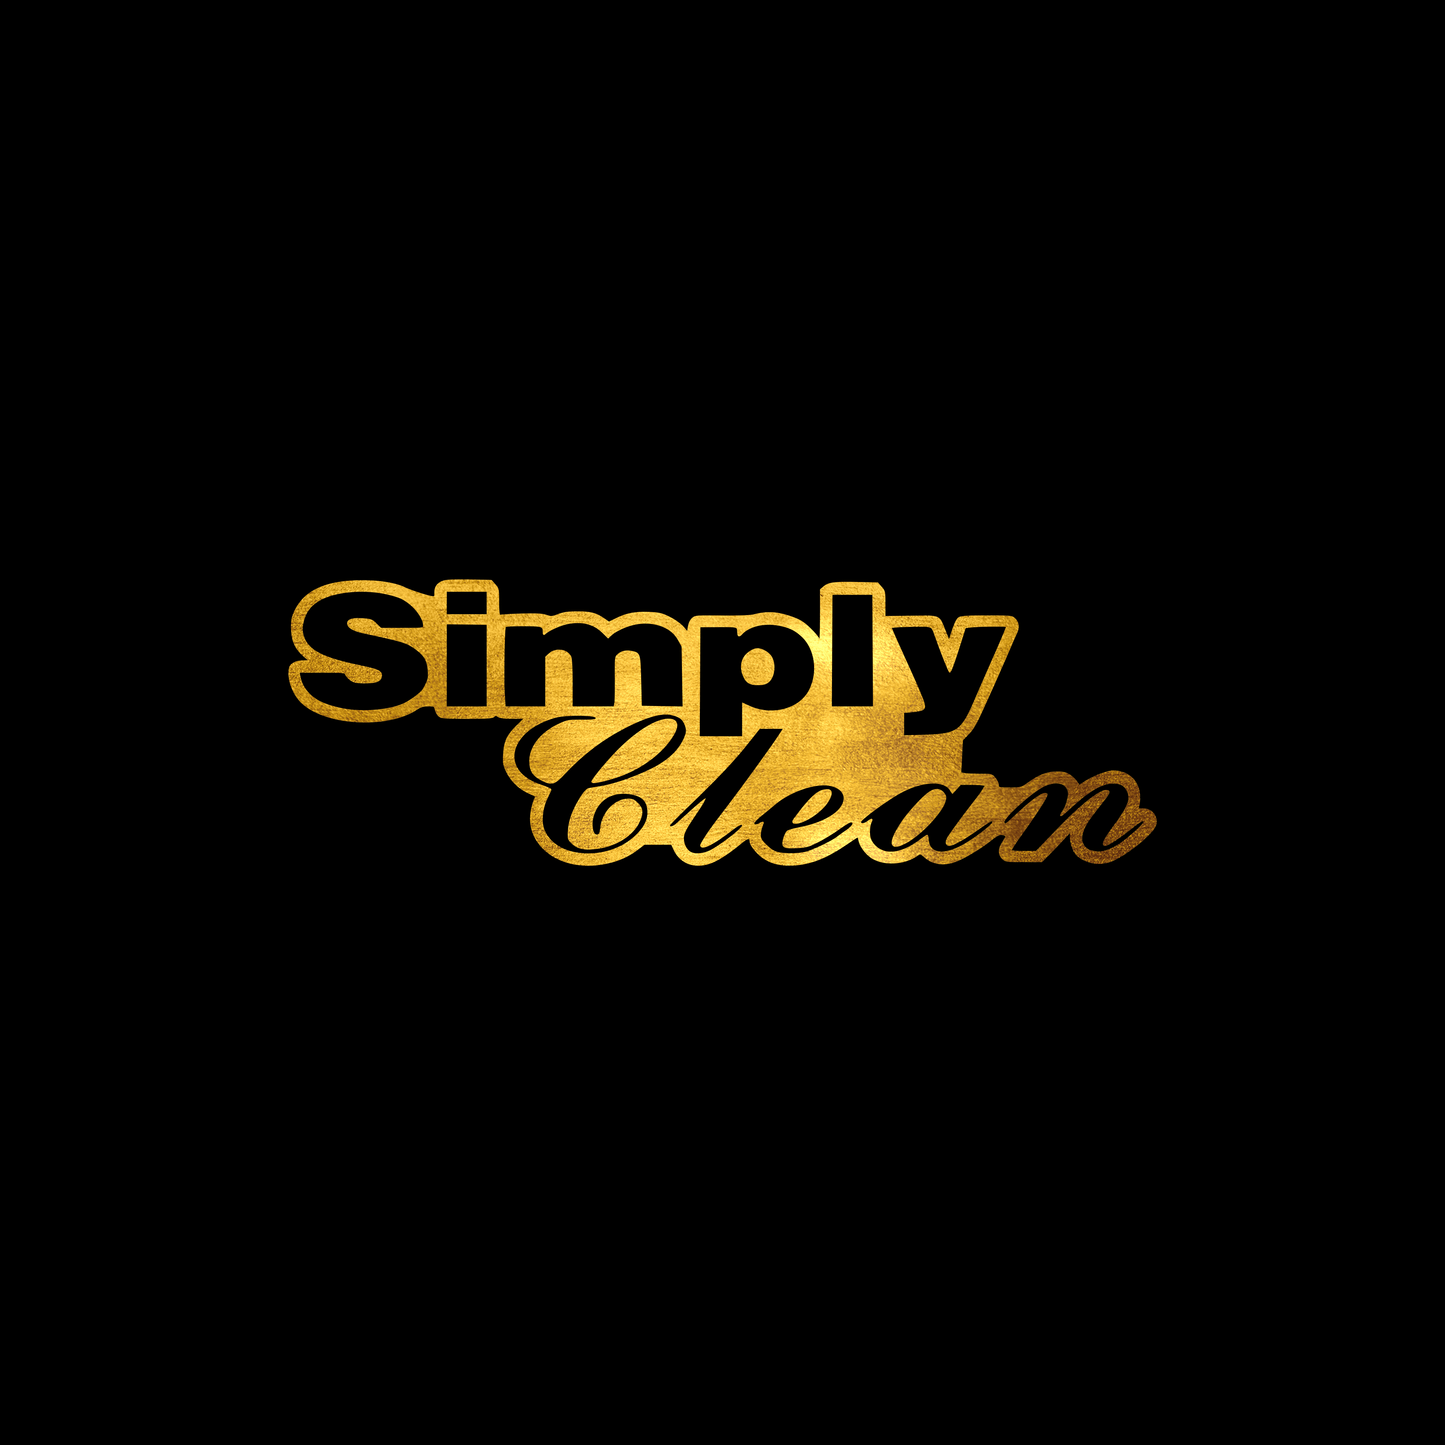 Simply clean sticker decal